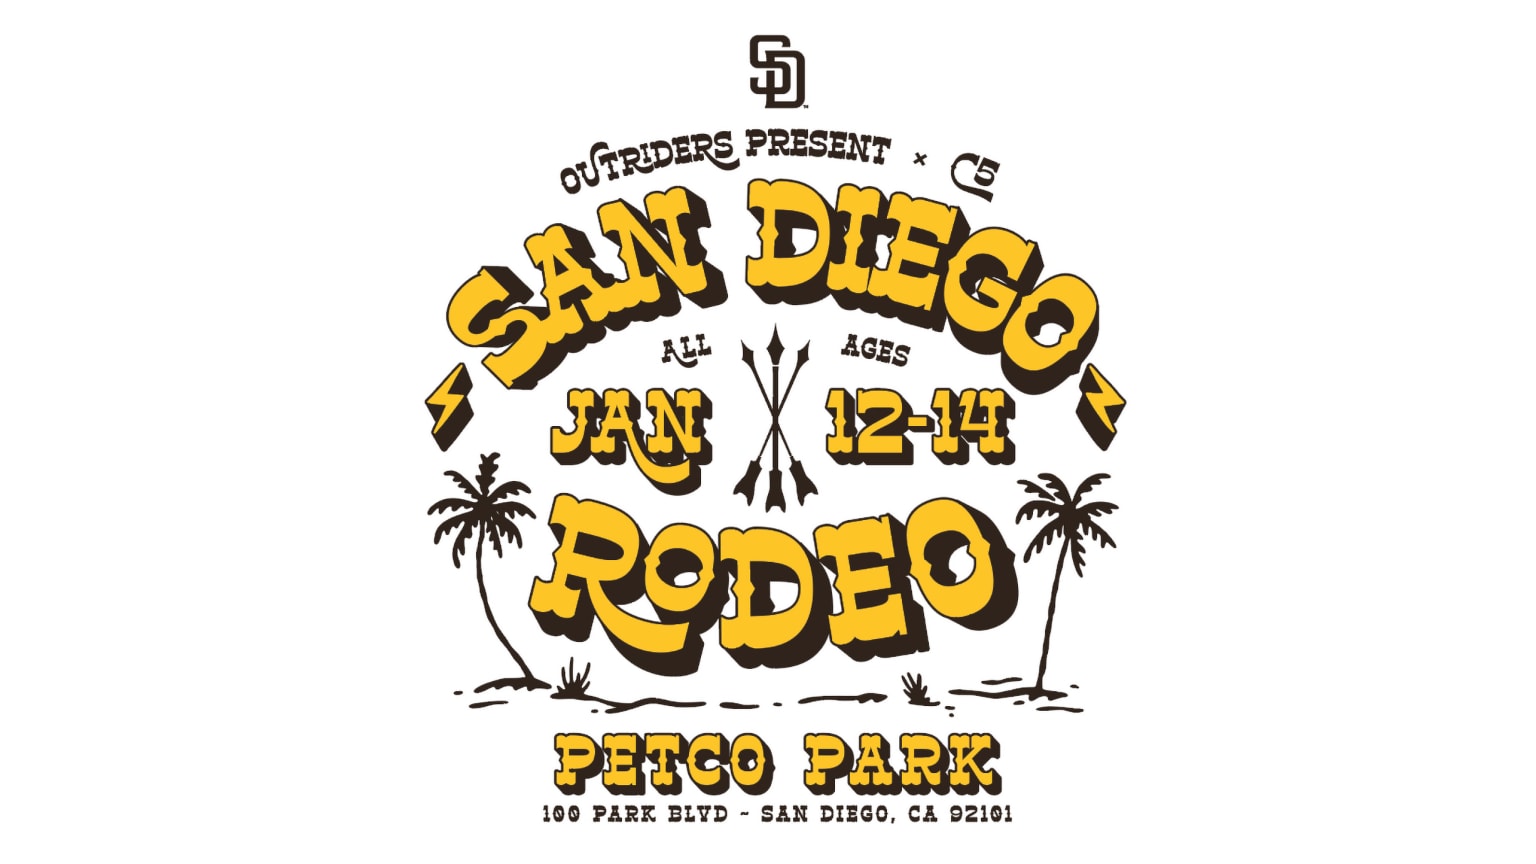 Petco Park on X: Due to the concerts at Petco Park, the @Padres